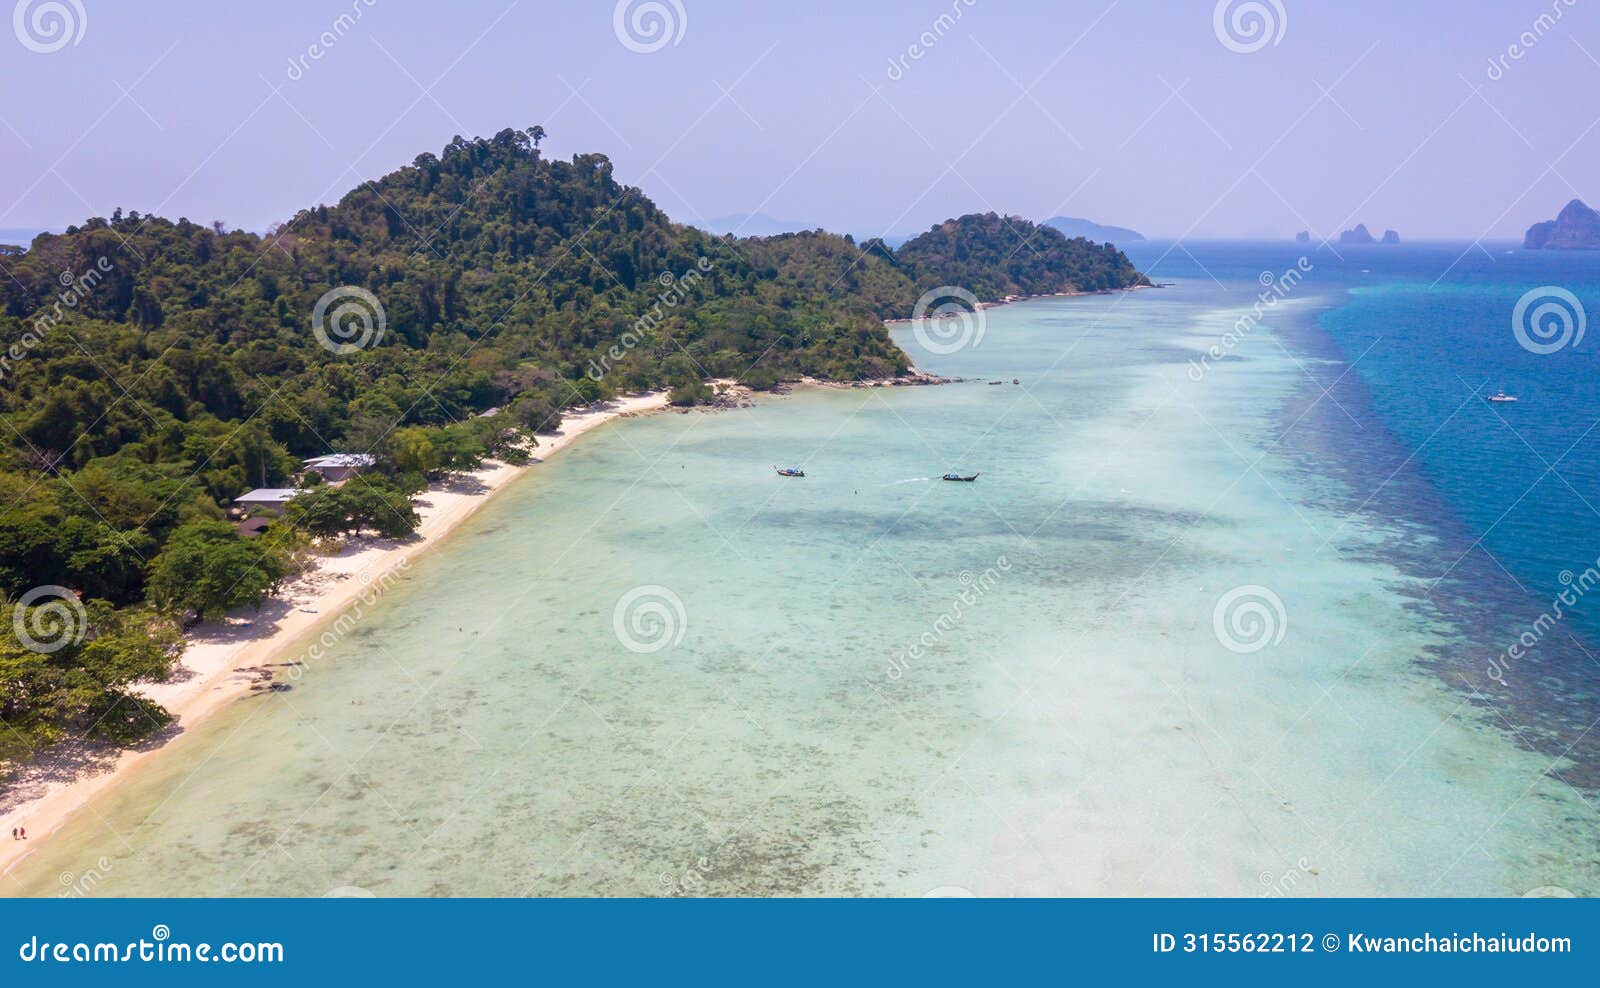 aerial view of koh kradan, trang thailand.the untouched natural beauty of the beach